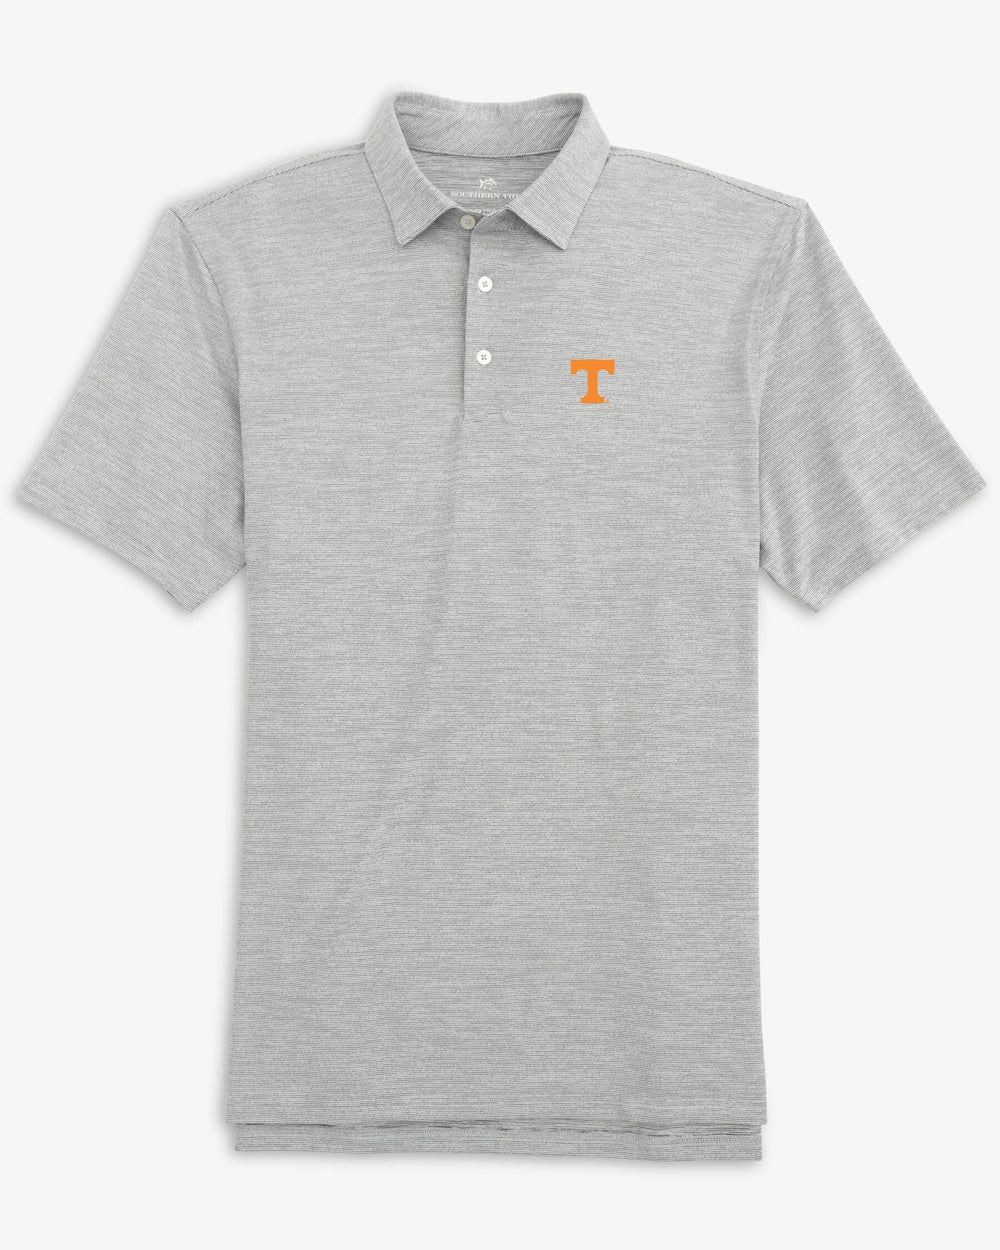 The front view of the Tennessee Vols Driver Spacedye Polo Shirt by Southern Tide - Black